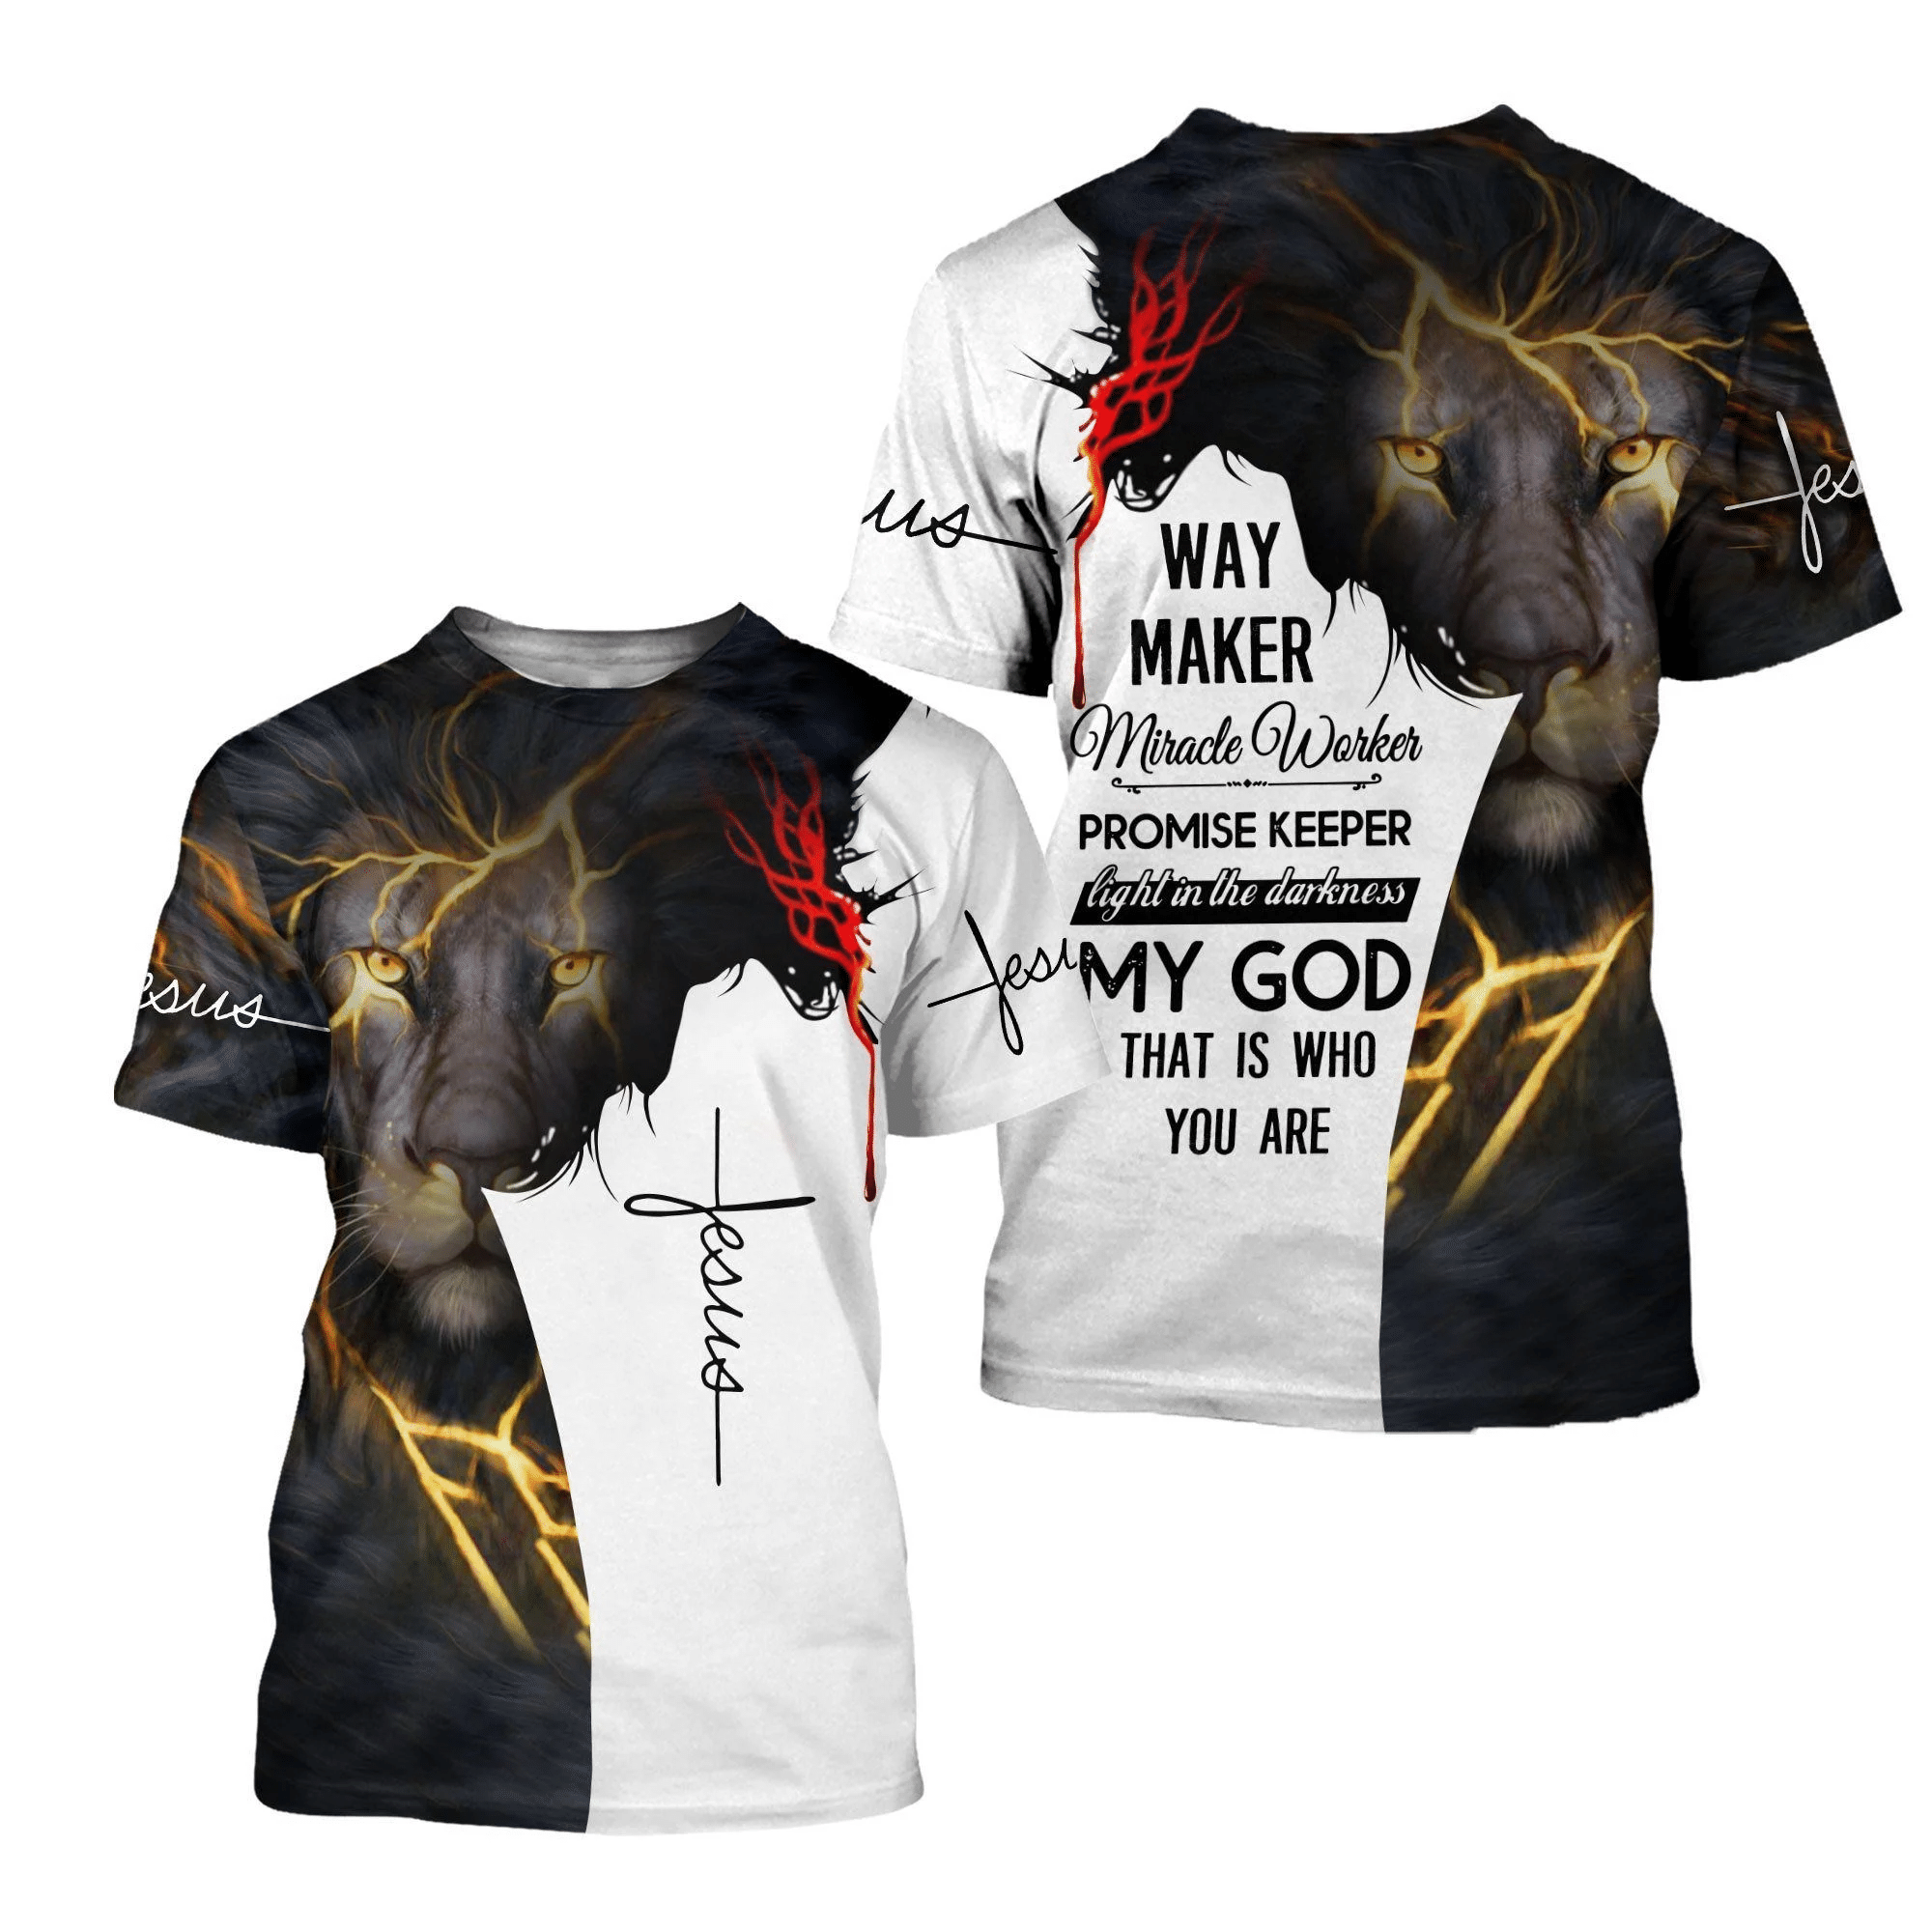 Way Maker Miracle Worker Promise Keeper 3D Printed Shirt Style: 3D T-Shirt, Color: Black